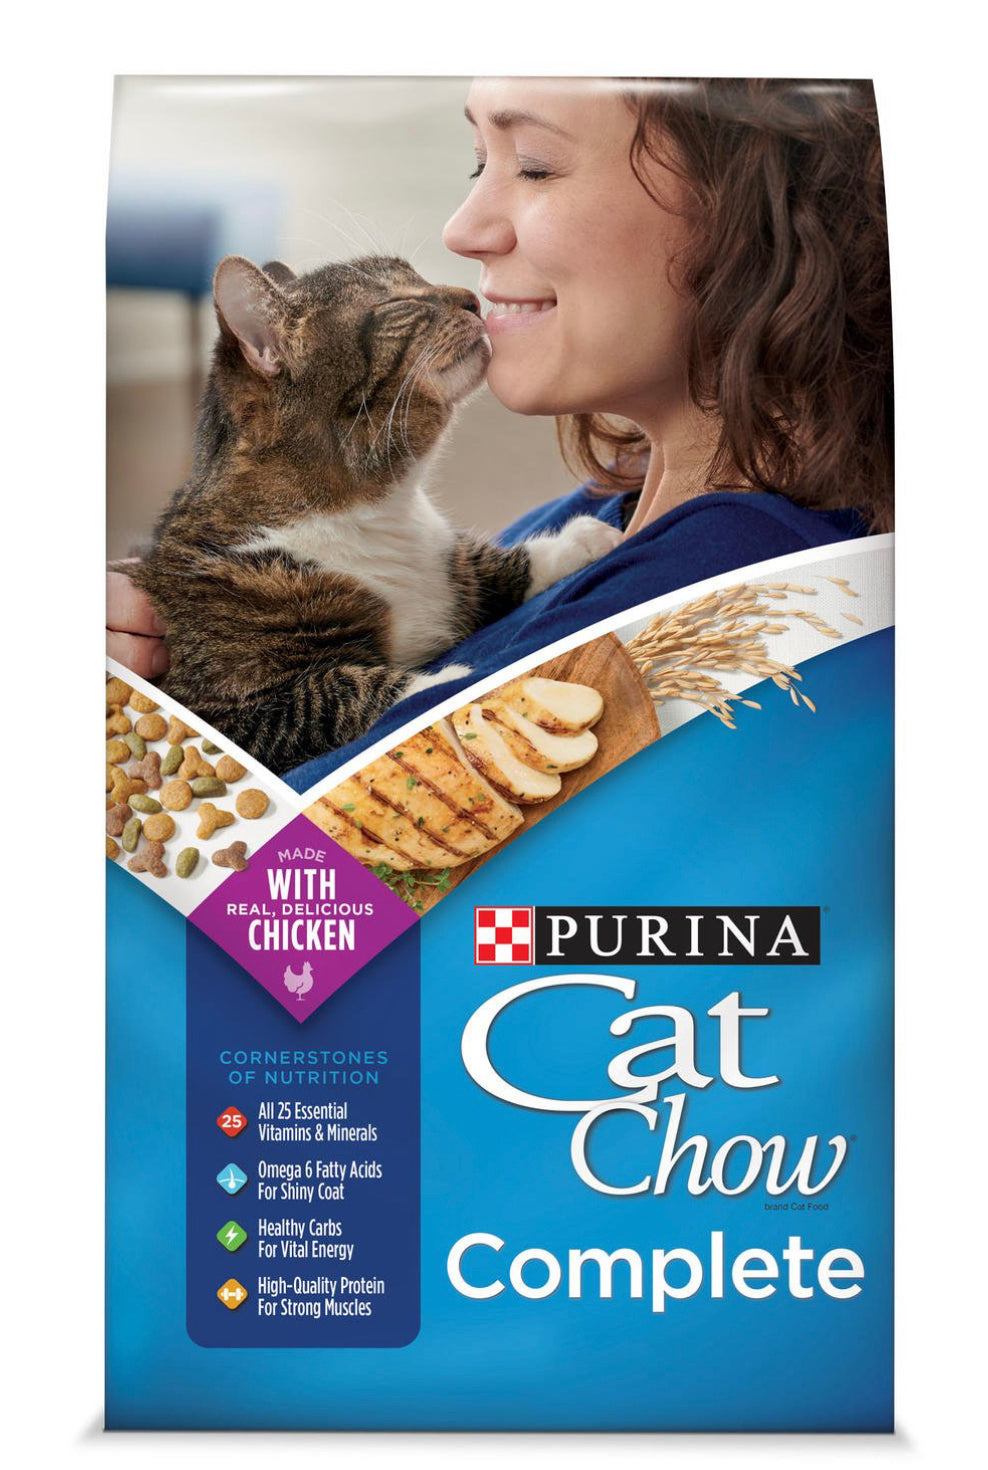 Purina Cat Chow-complete